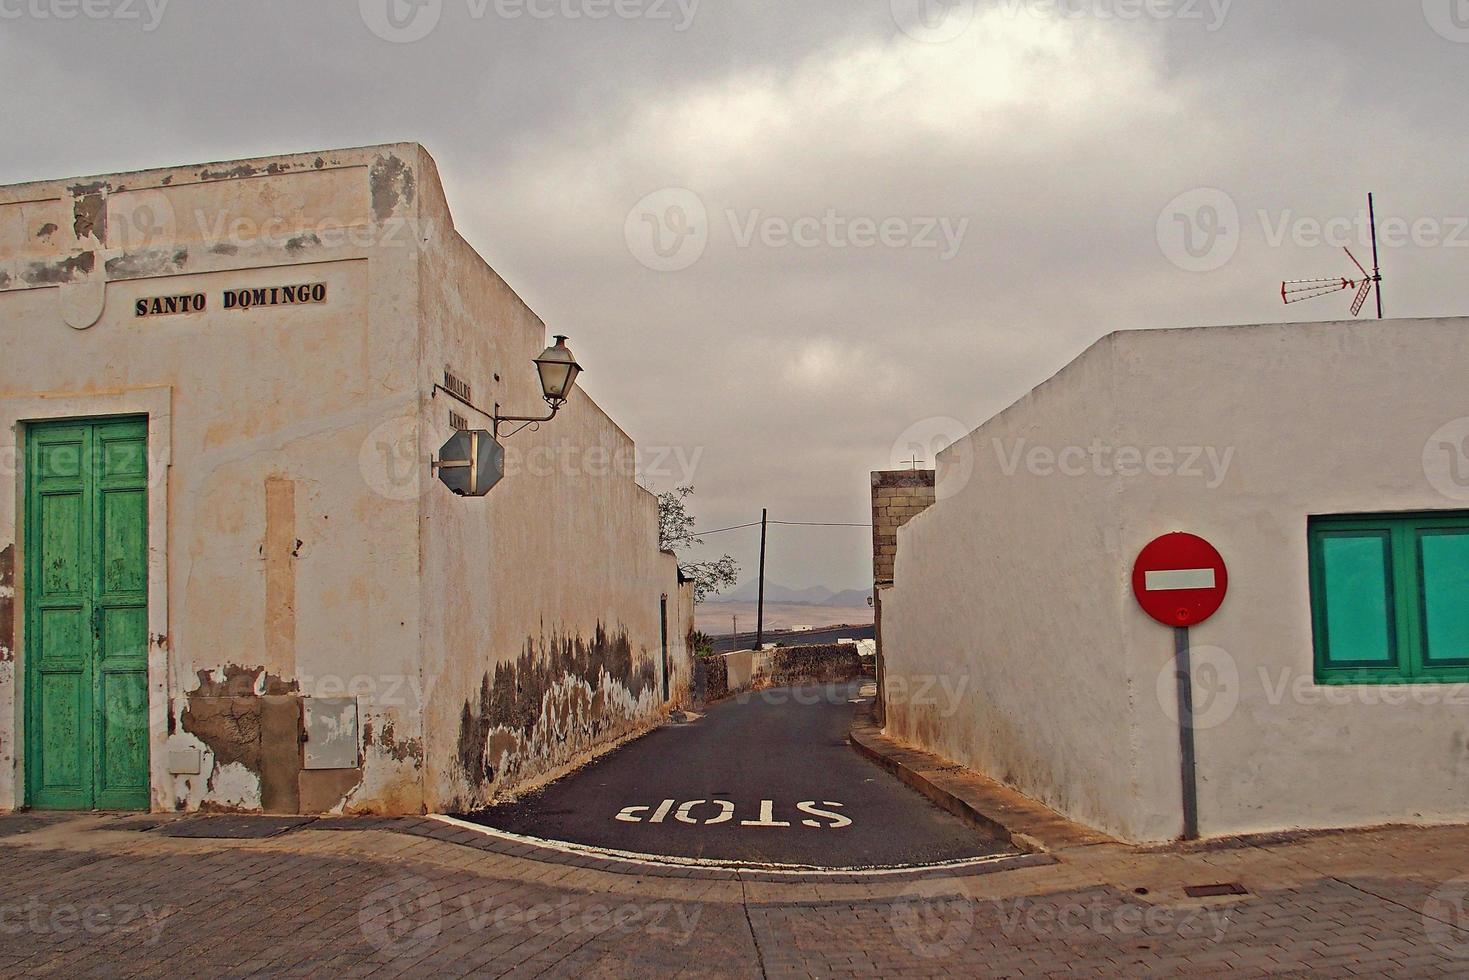 white low historic buildings and narrow streets in the Spanish city of Teguise, Lanzarote photo